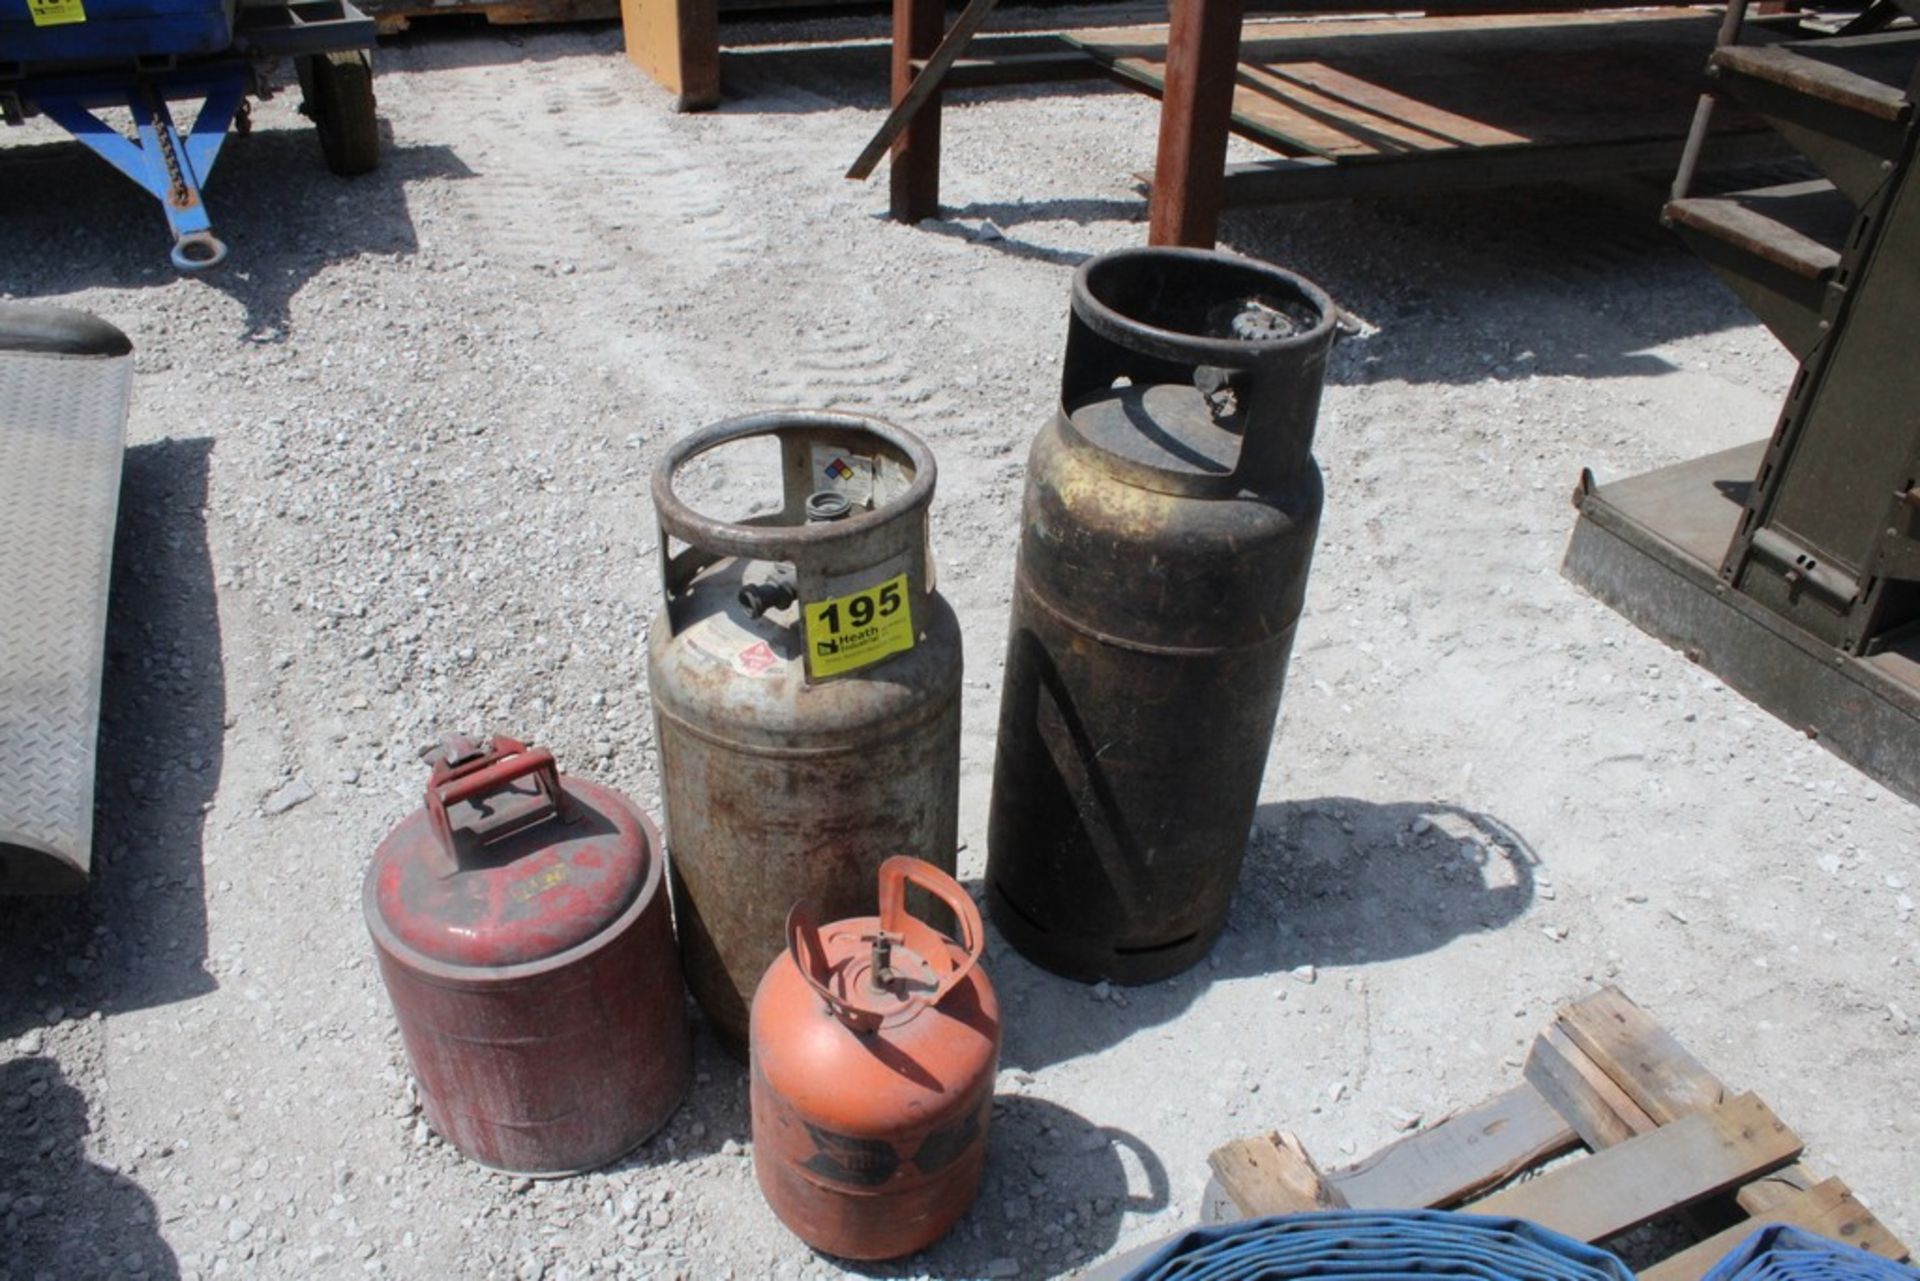 (2) PROPANE TANKS, FULE CAN & TANK OF CLEAN-UP SOLVENT